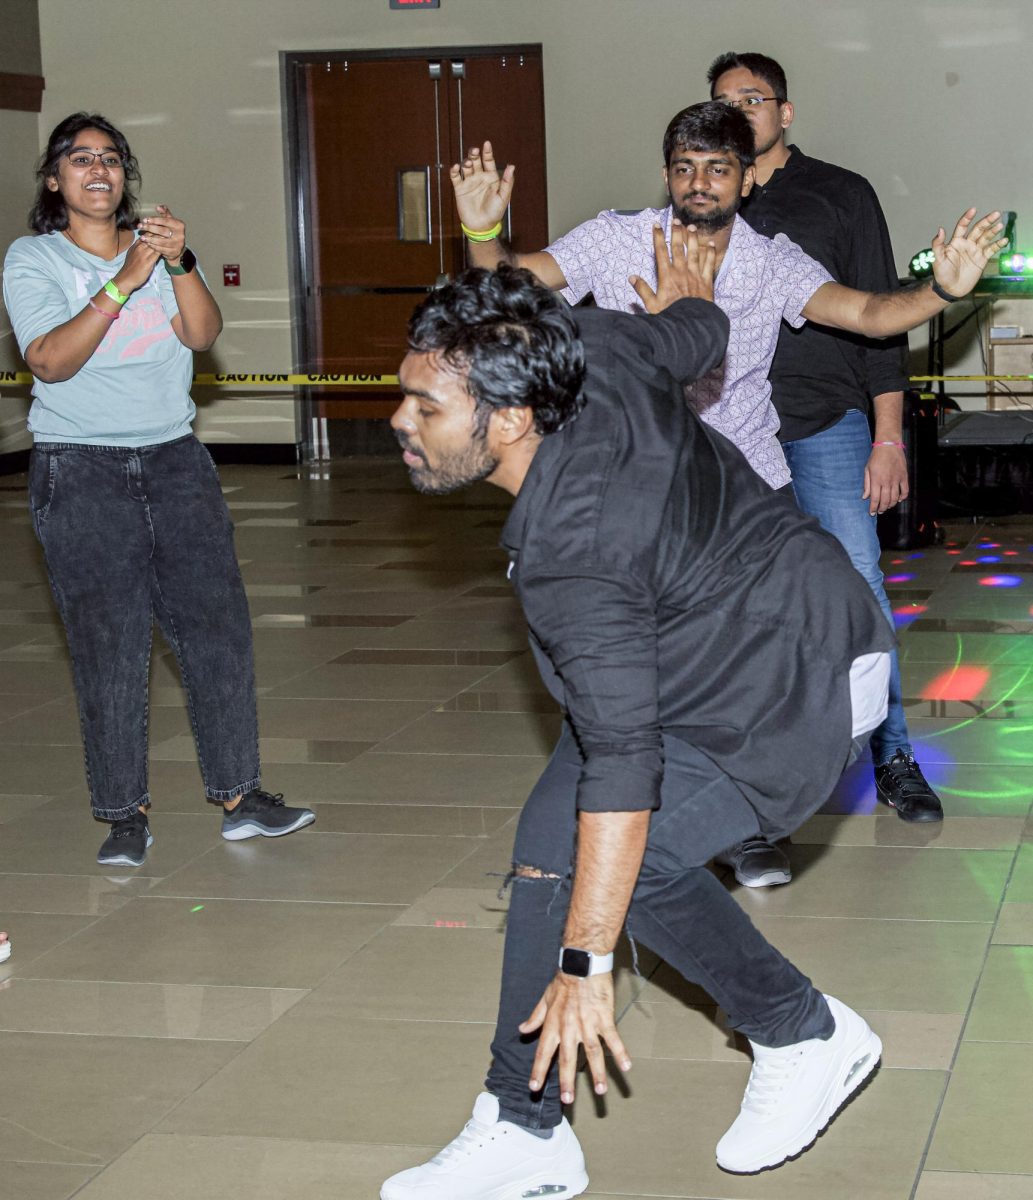 Wichita State students get funky in the middle of the dancefloor, dancing to classic hits played for Bollywood Night on Sept. 2.